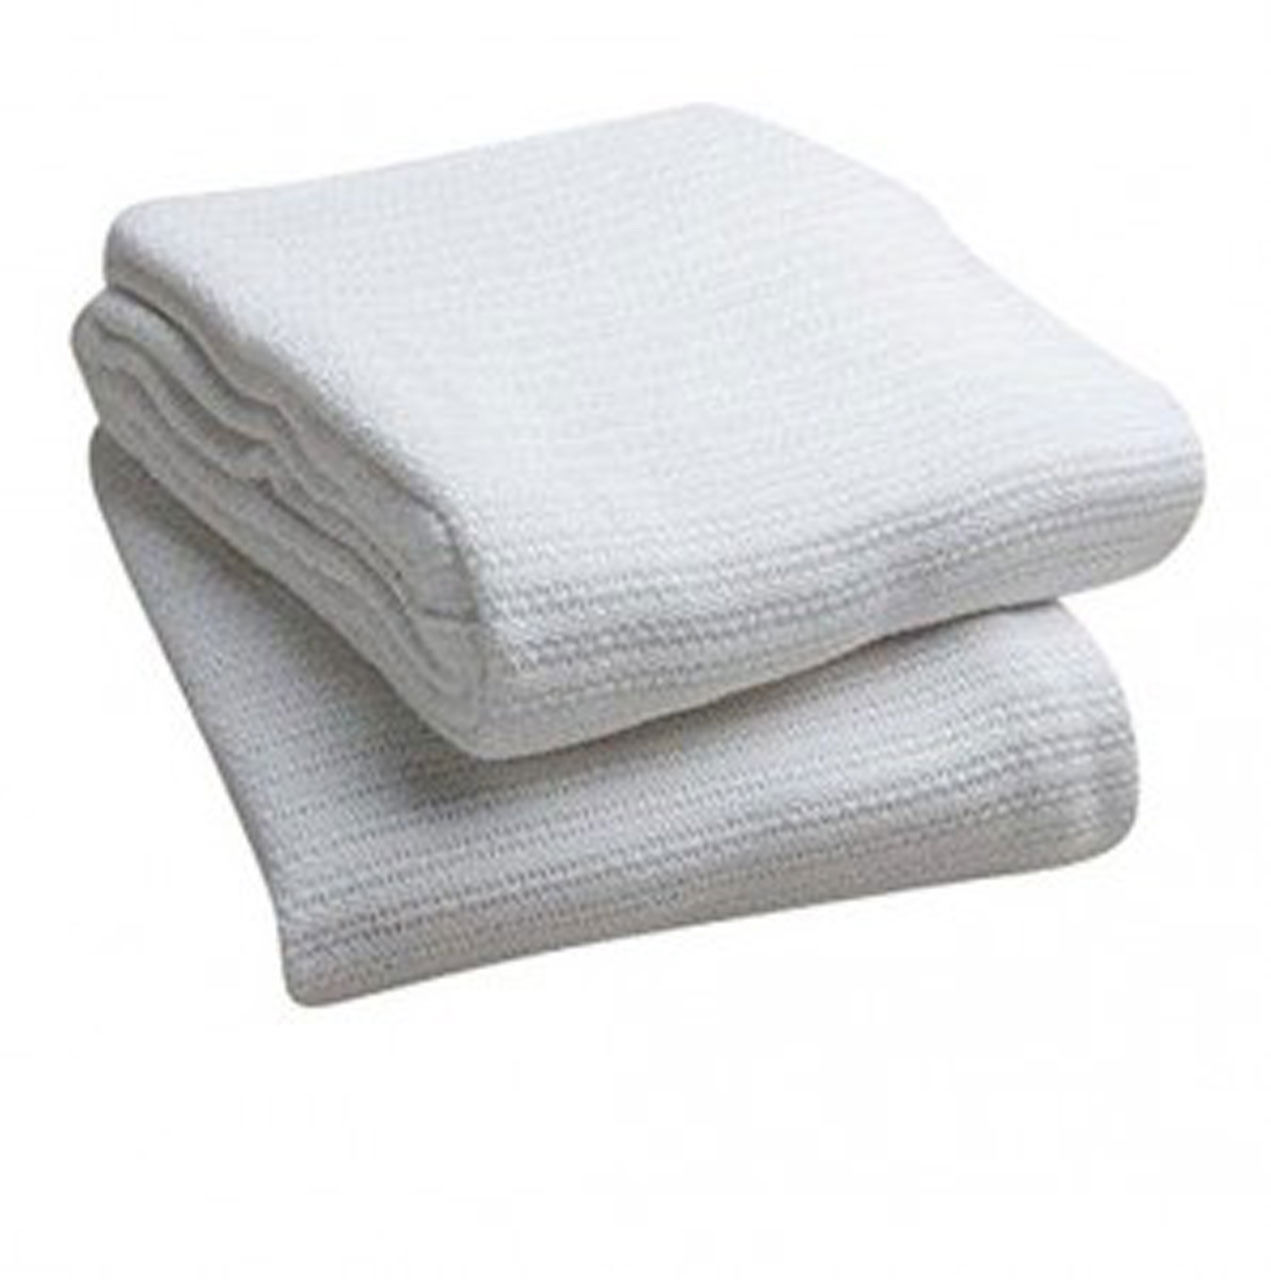 What is the intended purpose of the Open Weave Thermal Blanket, White?